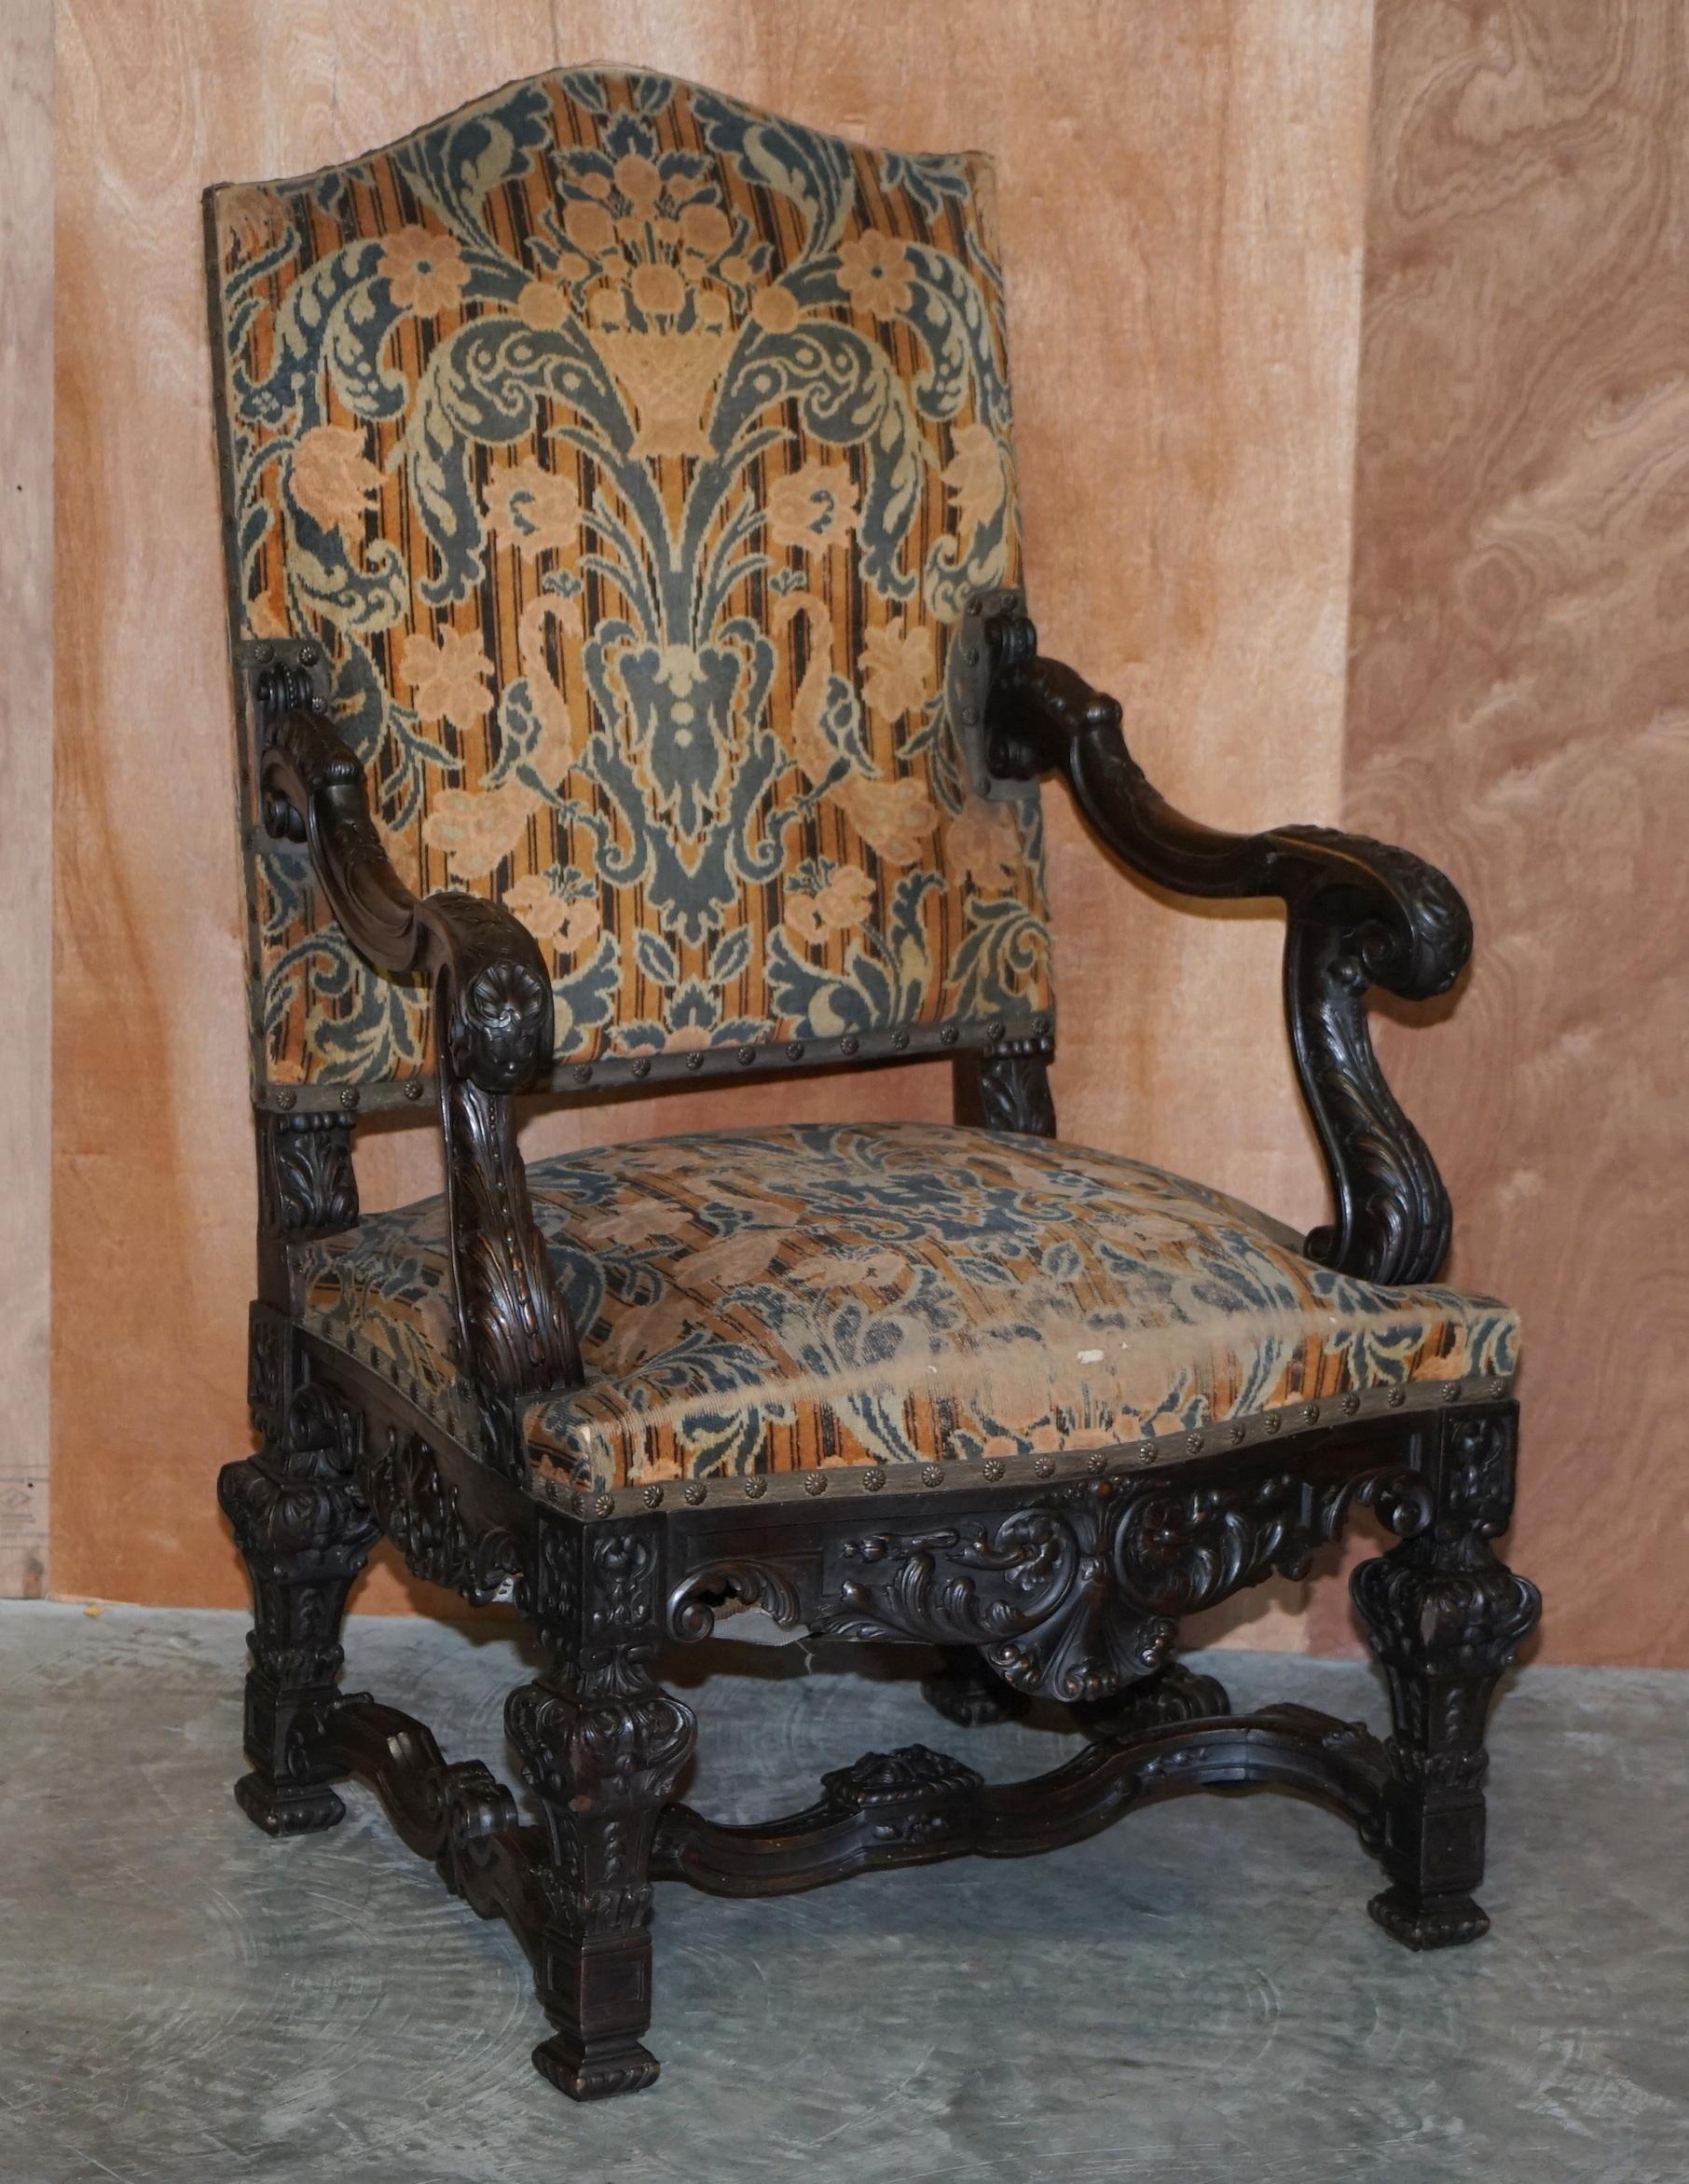 We are delighted to offer for sale this lovely pair of original Italian circa 1860 hand carved walnut throne armchairs with period upholstery

A wonderfully decorative and super original pair of Venetian hand carved throne armchairs. The frames